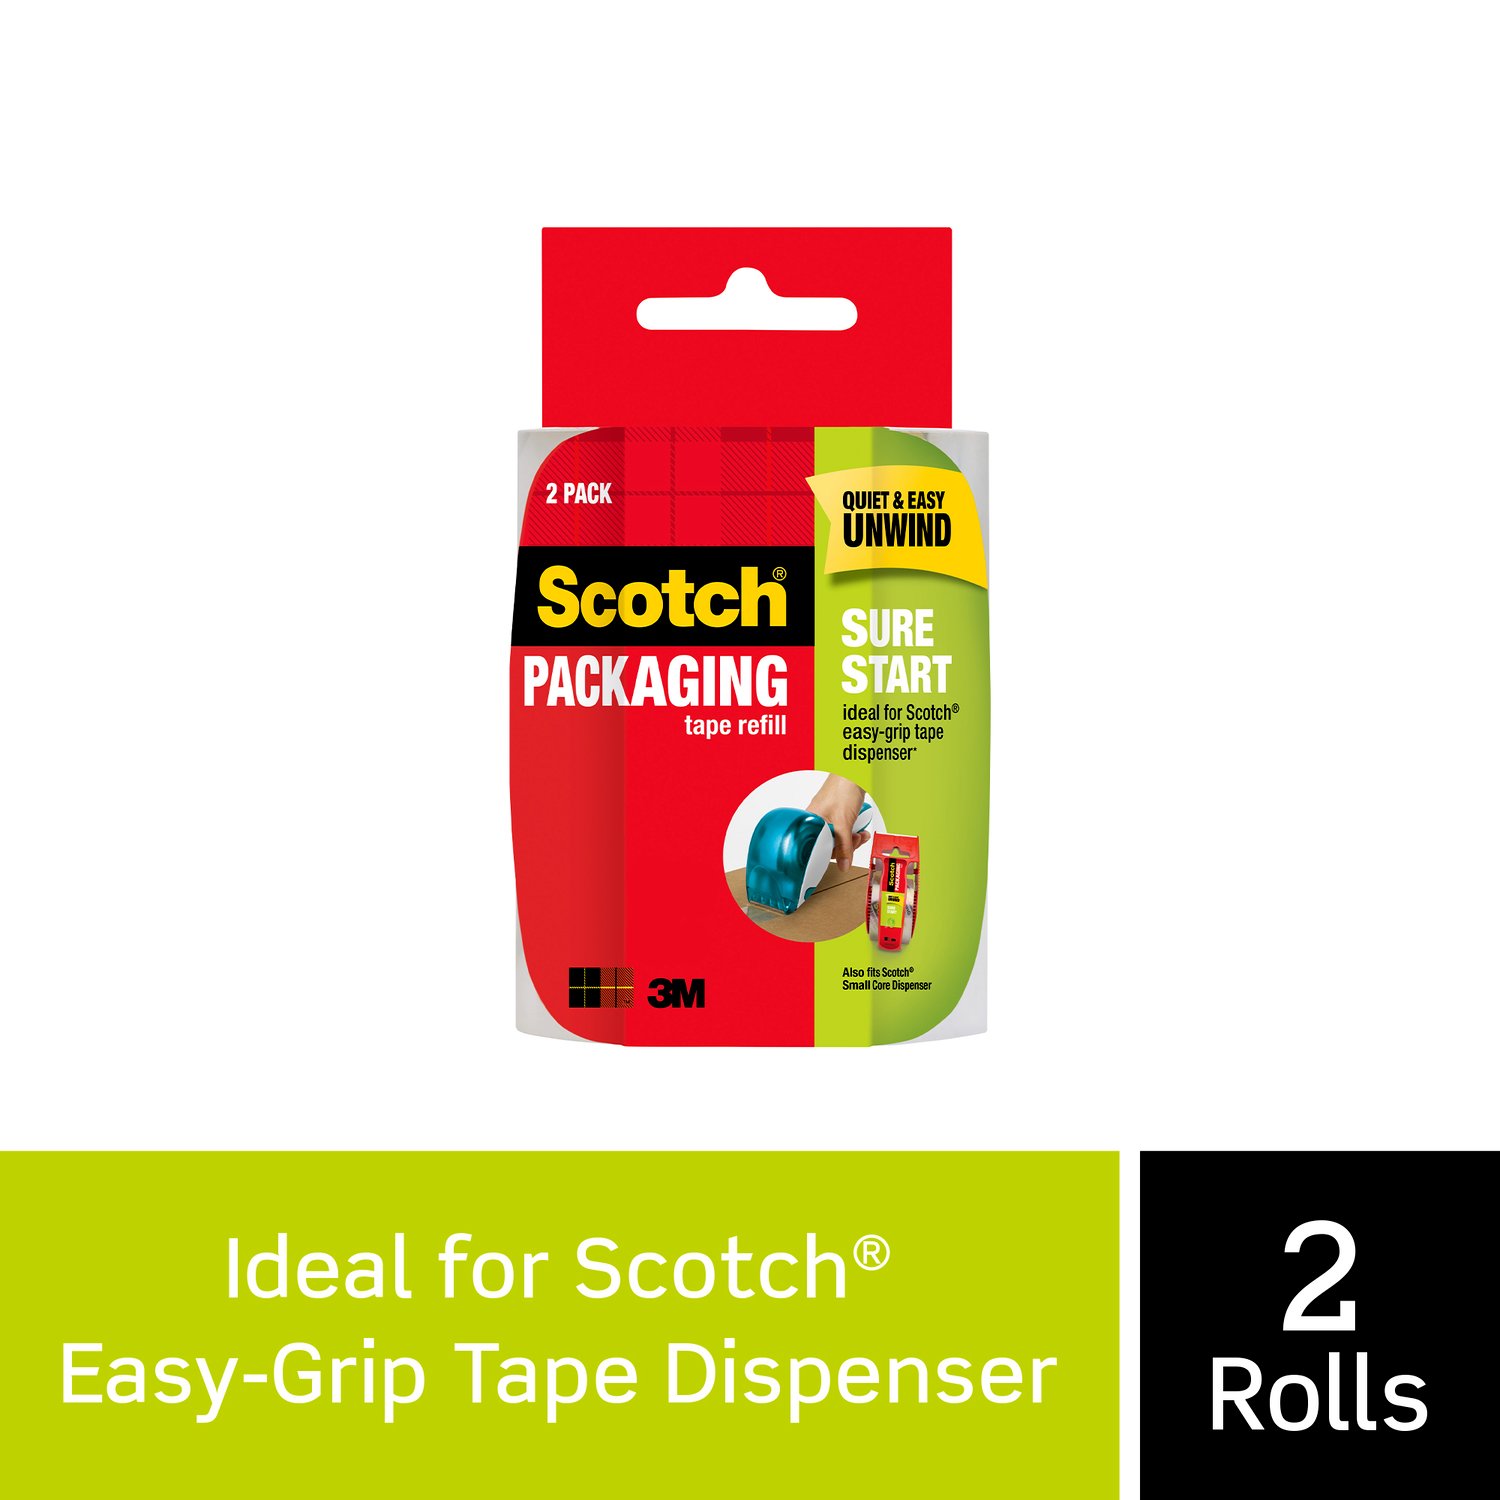 7010369660 - Scotch Sure Start Shipping Packaging Tape DP-1000-RR-2, 1.88 in x 900
in (48 mm x 22,8 m) 2 Pack